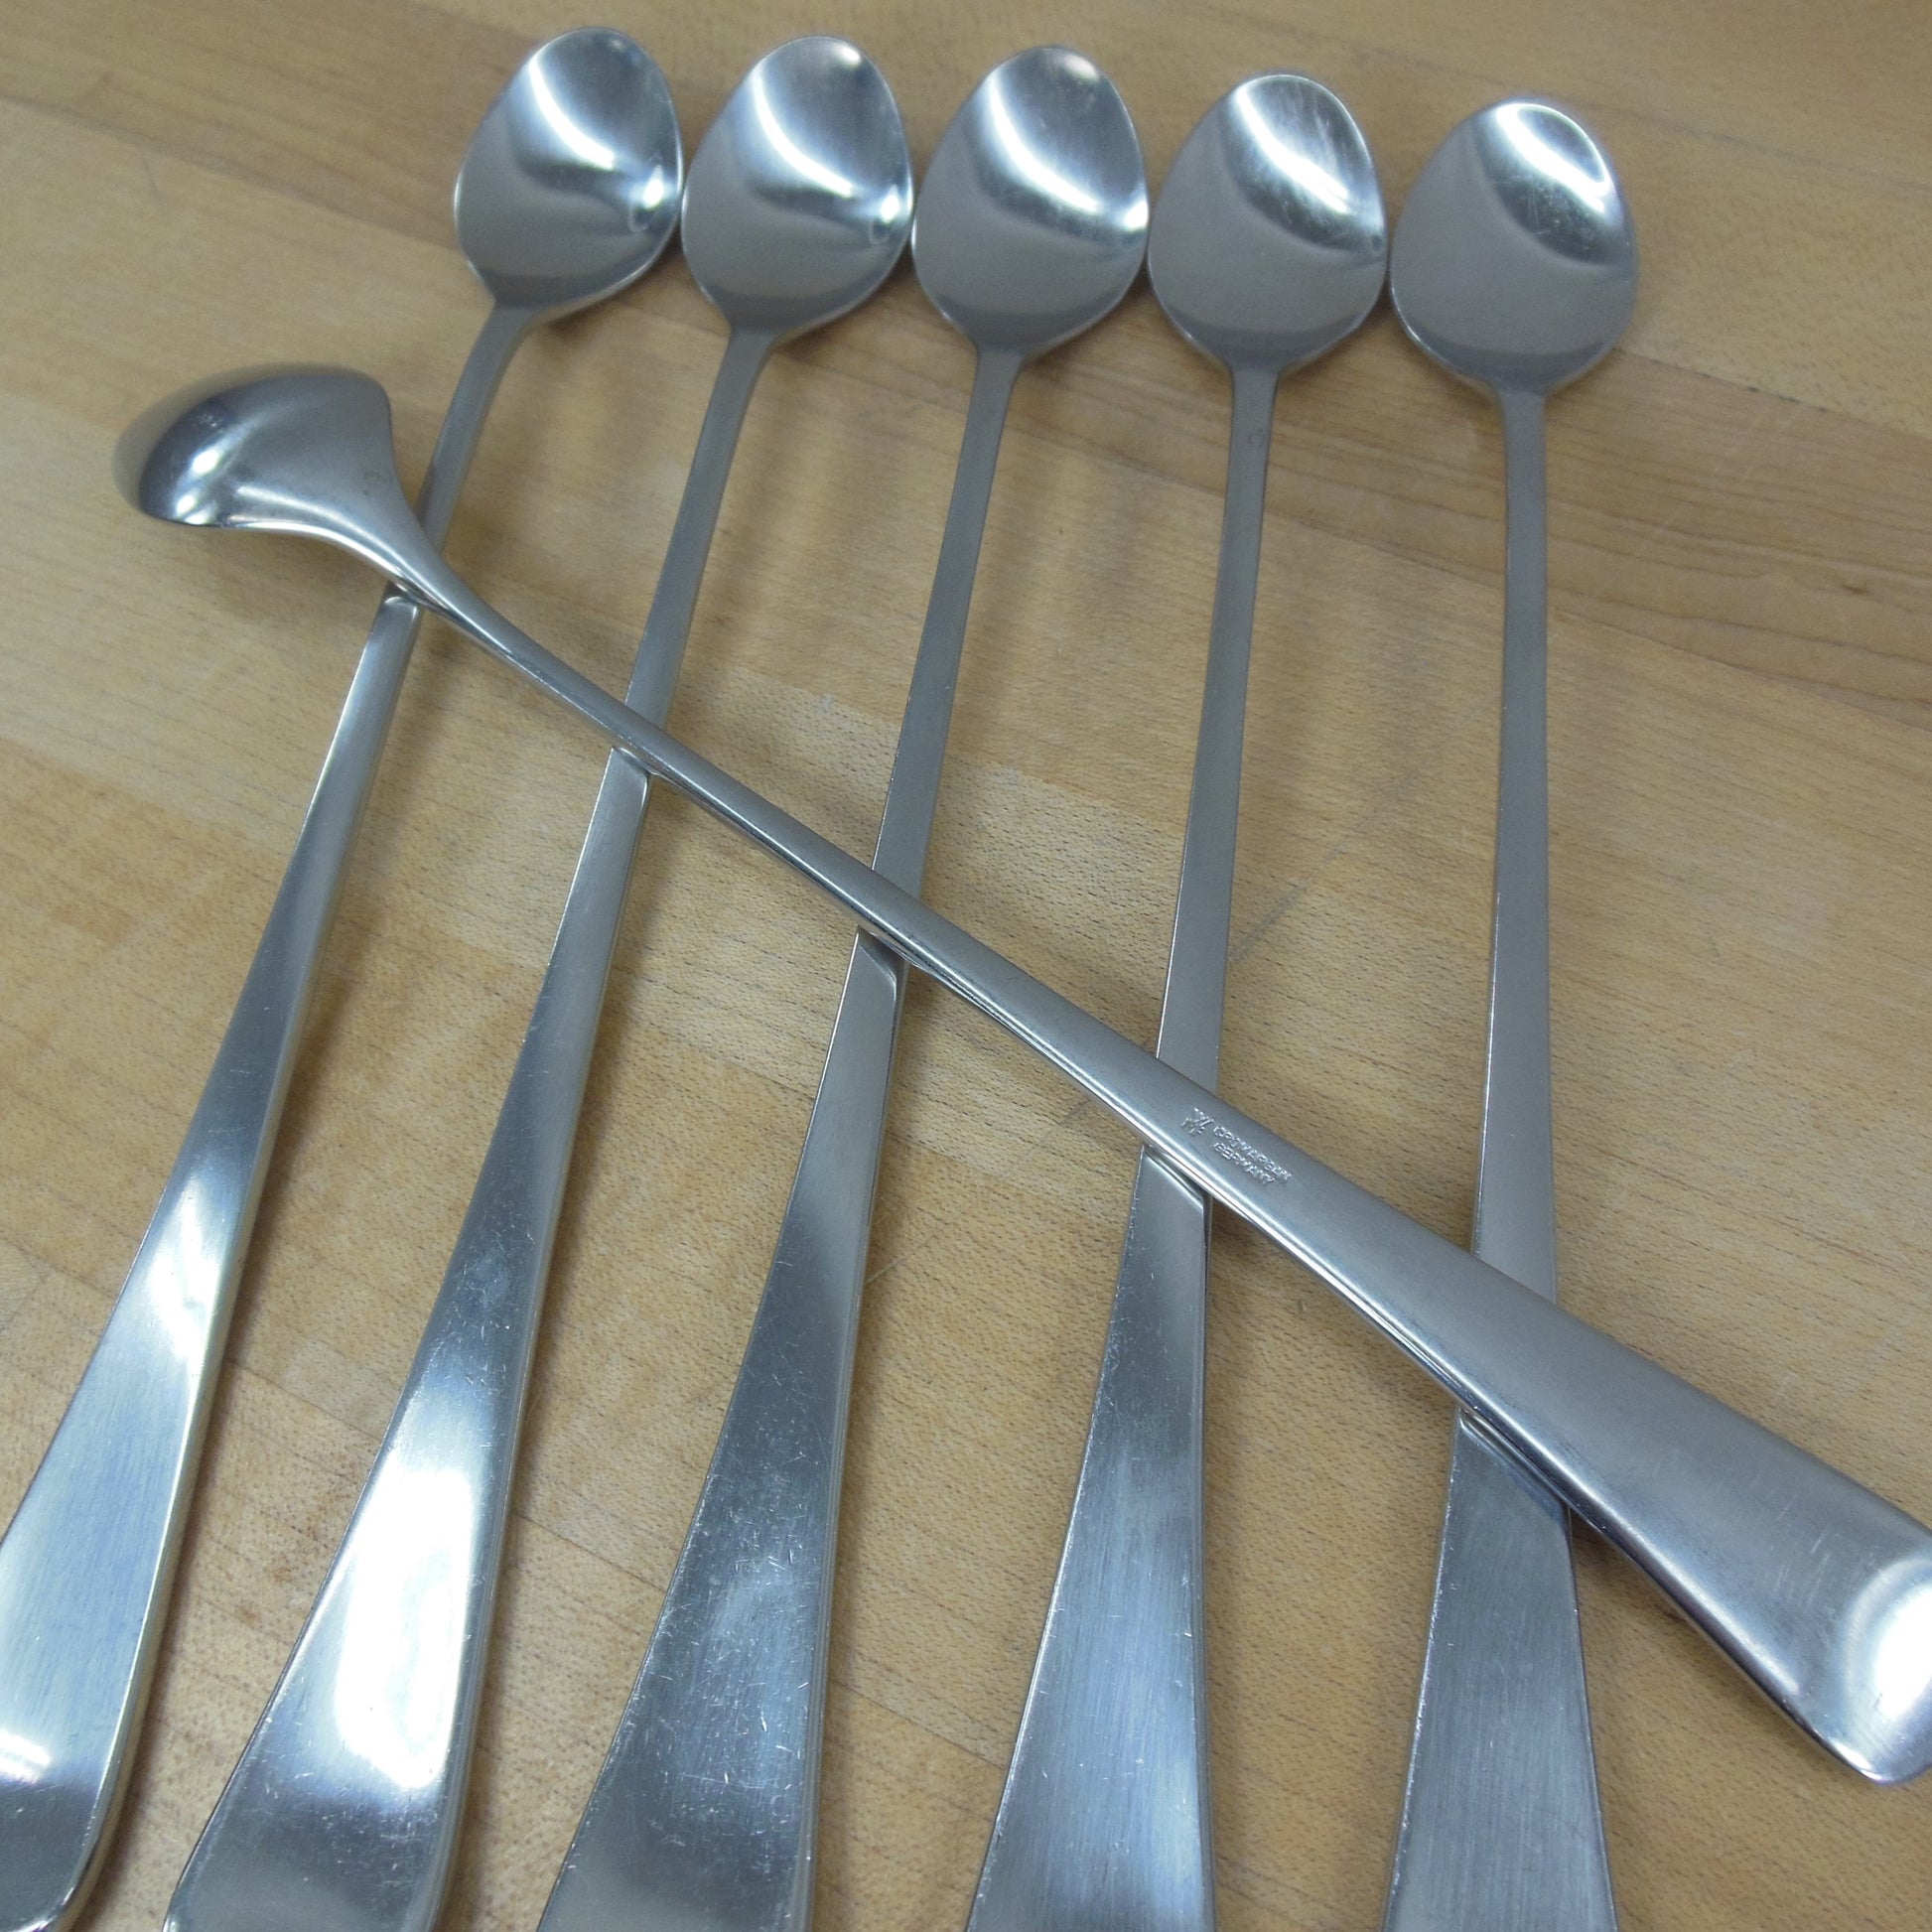 WMF Germany Cromargan Stainless Finesse Flatware - 6 Set Iced Tea Spoons used